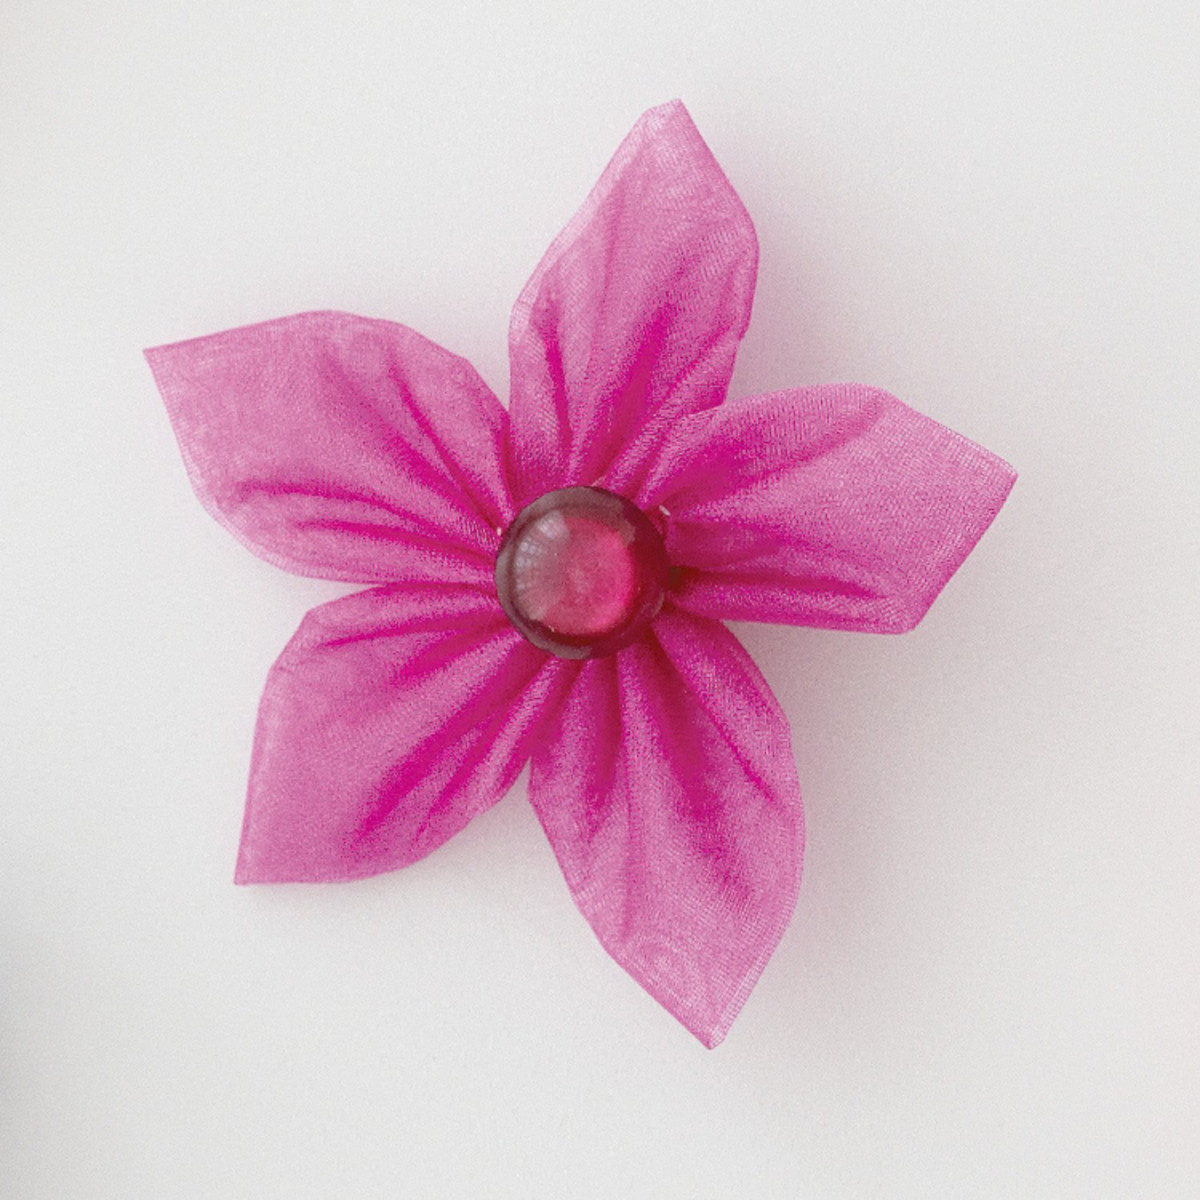 Use a Clover Kanzashi flower maker to create your own embellishments like this one.